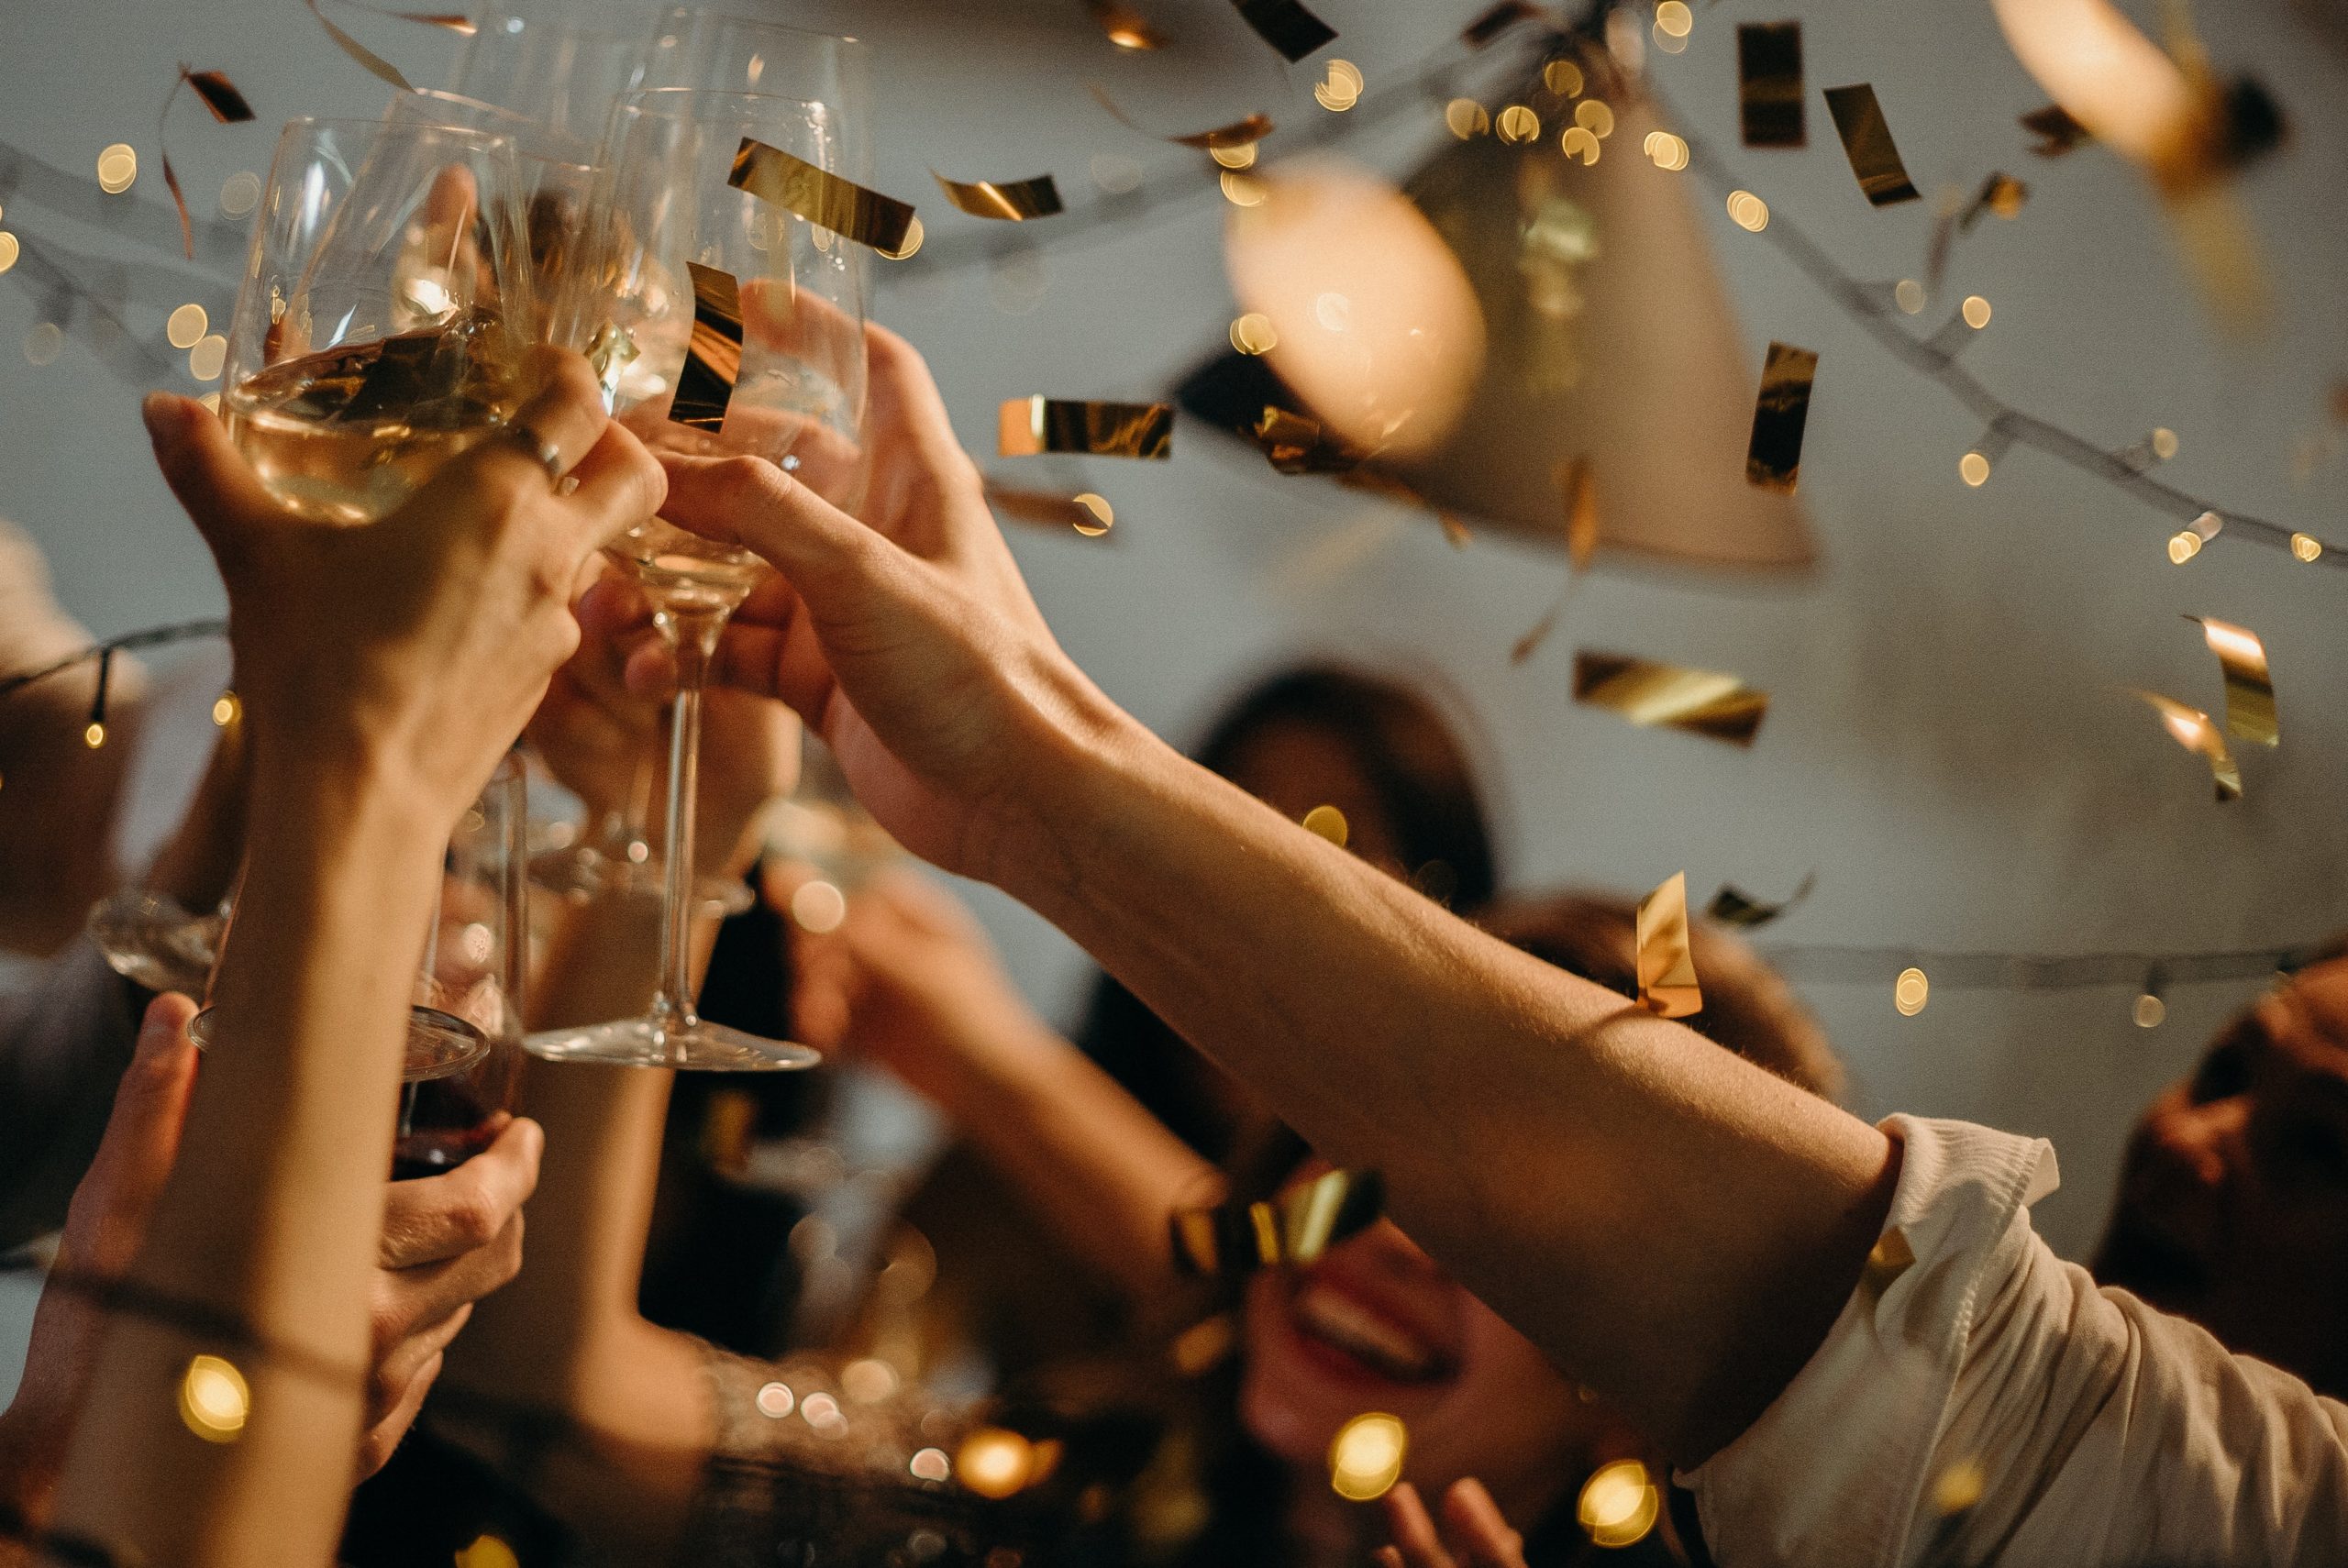 How to Throw a Party – Tips to Host an Unforgettable House Party